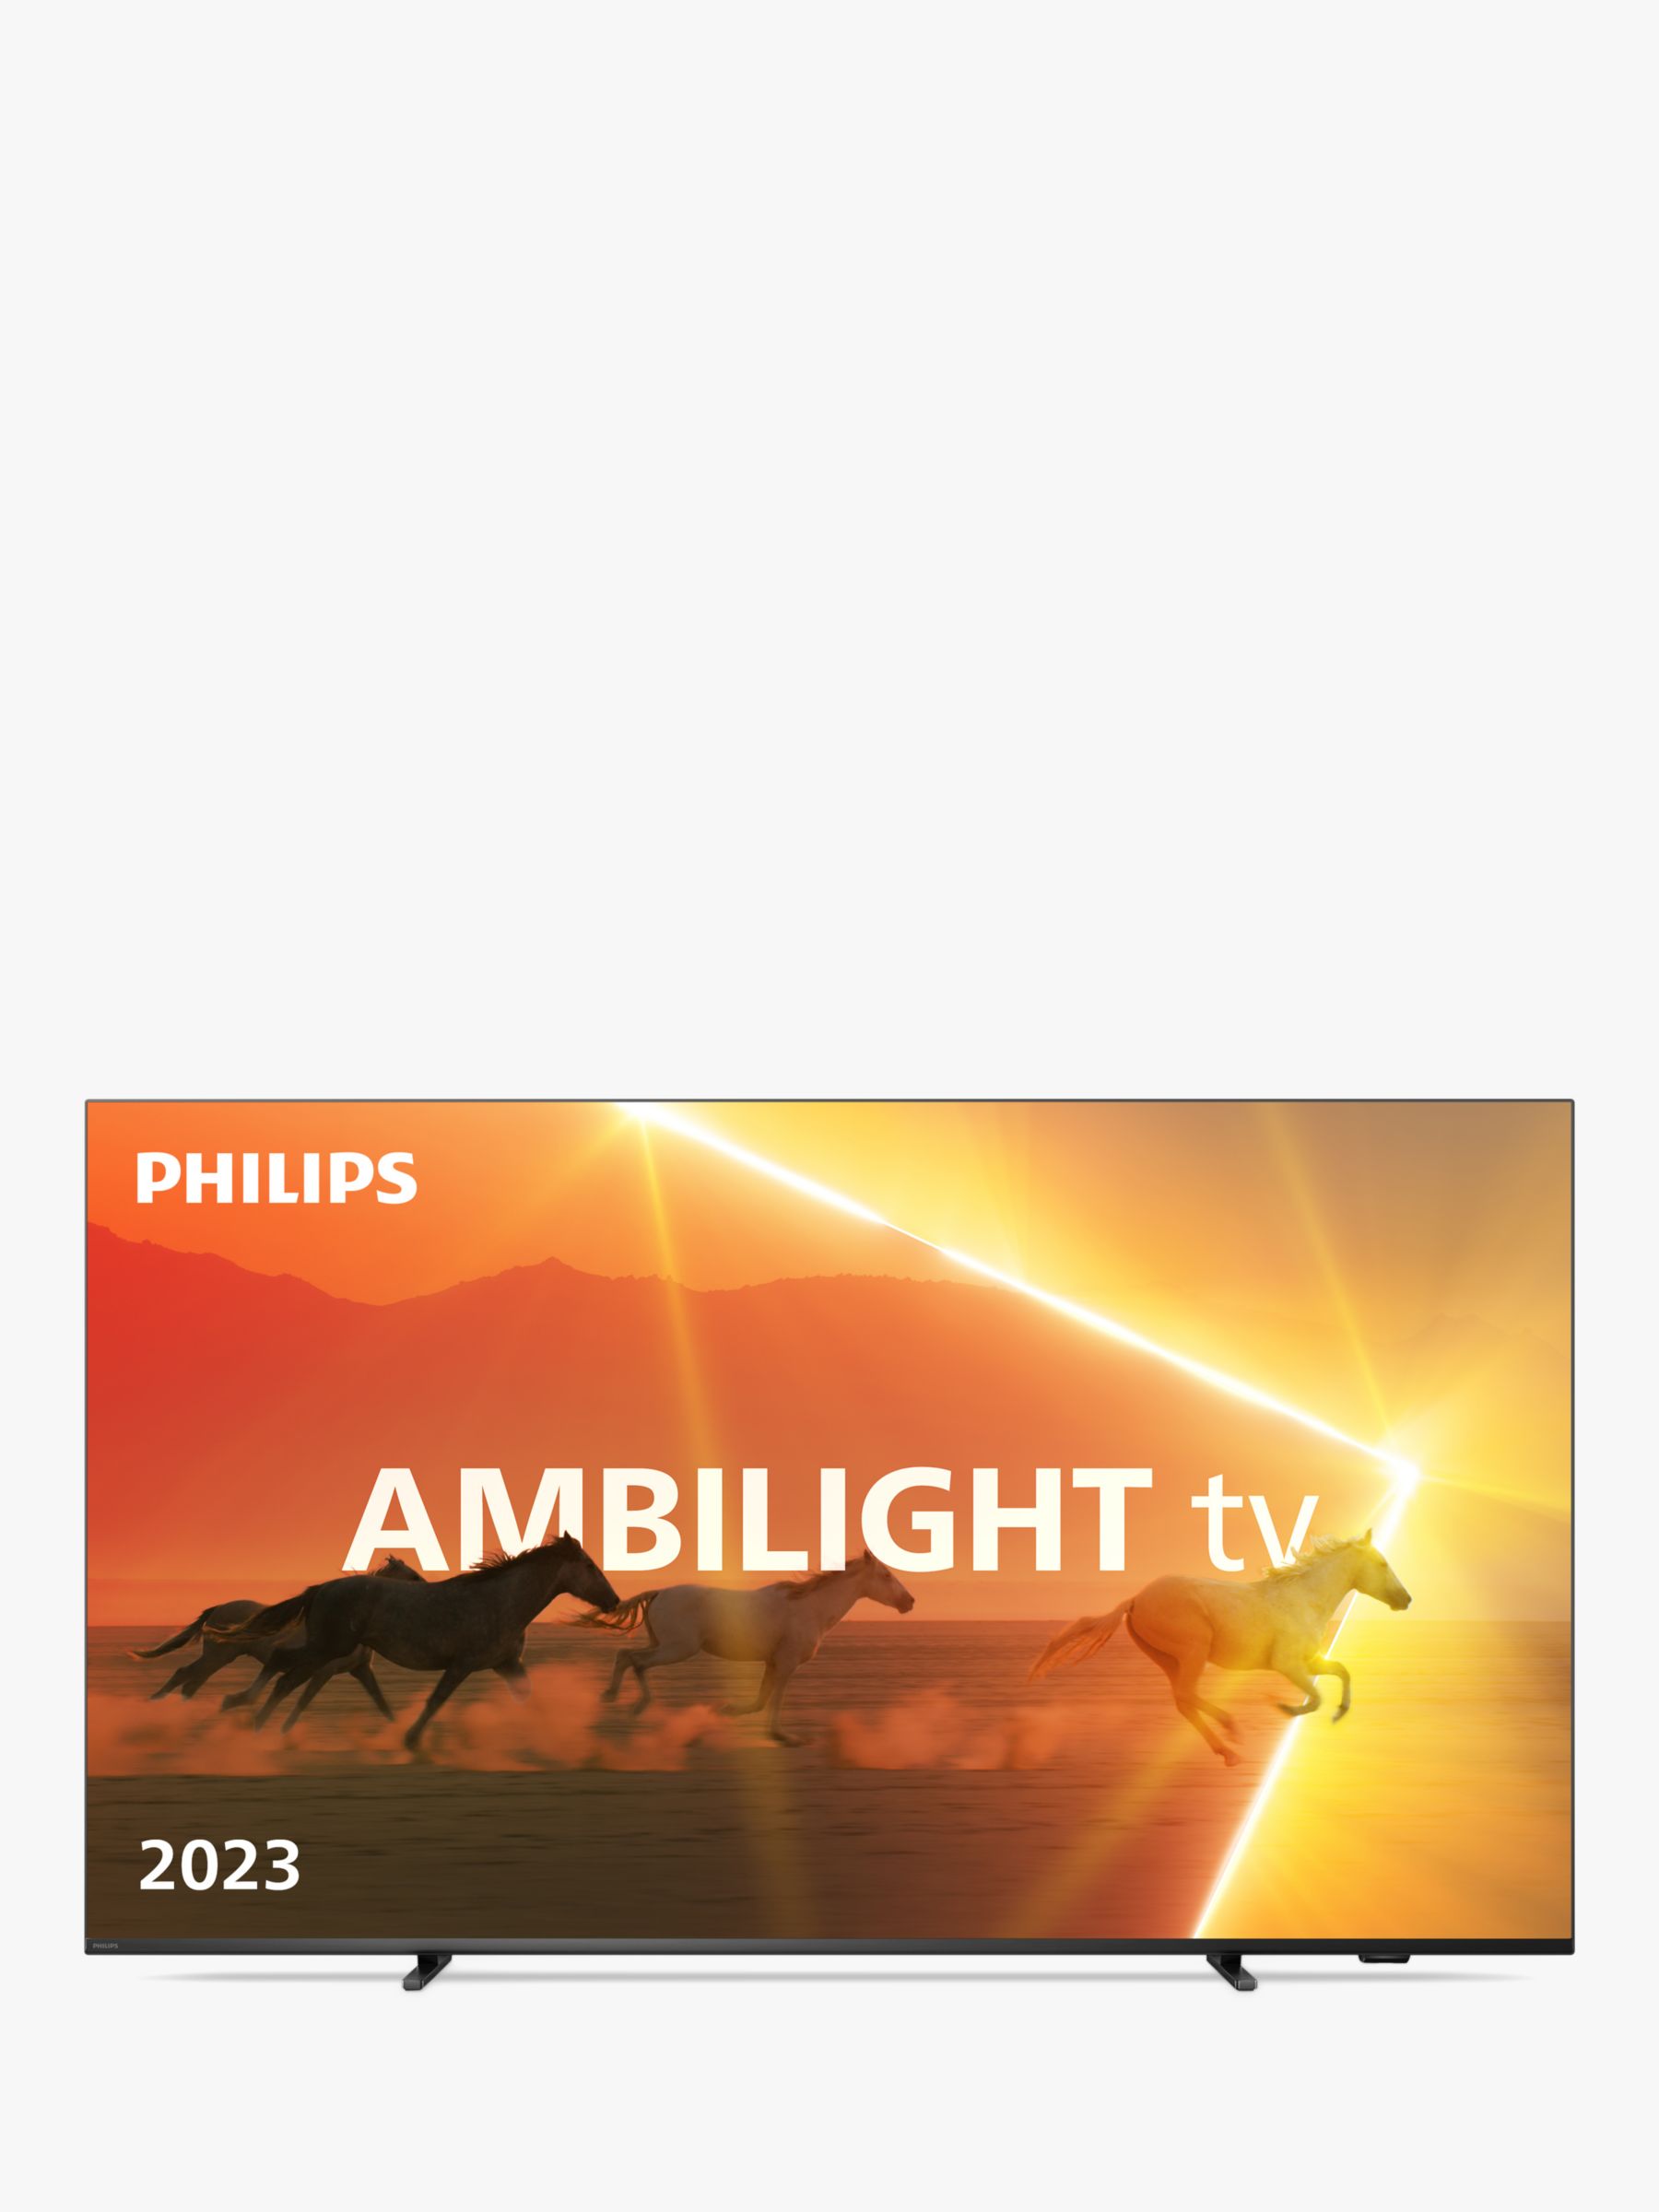 Philips 55PML9008 The Xtra (2023) MiniLED HDR 4K Ultra HD Smart TV, 55 inch with Freeview Play, Ambilight & Dolby Atmos, Anthracite Grey